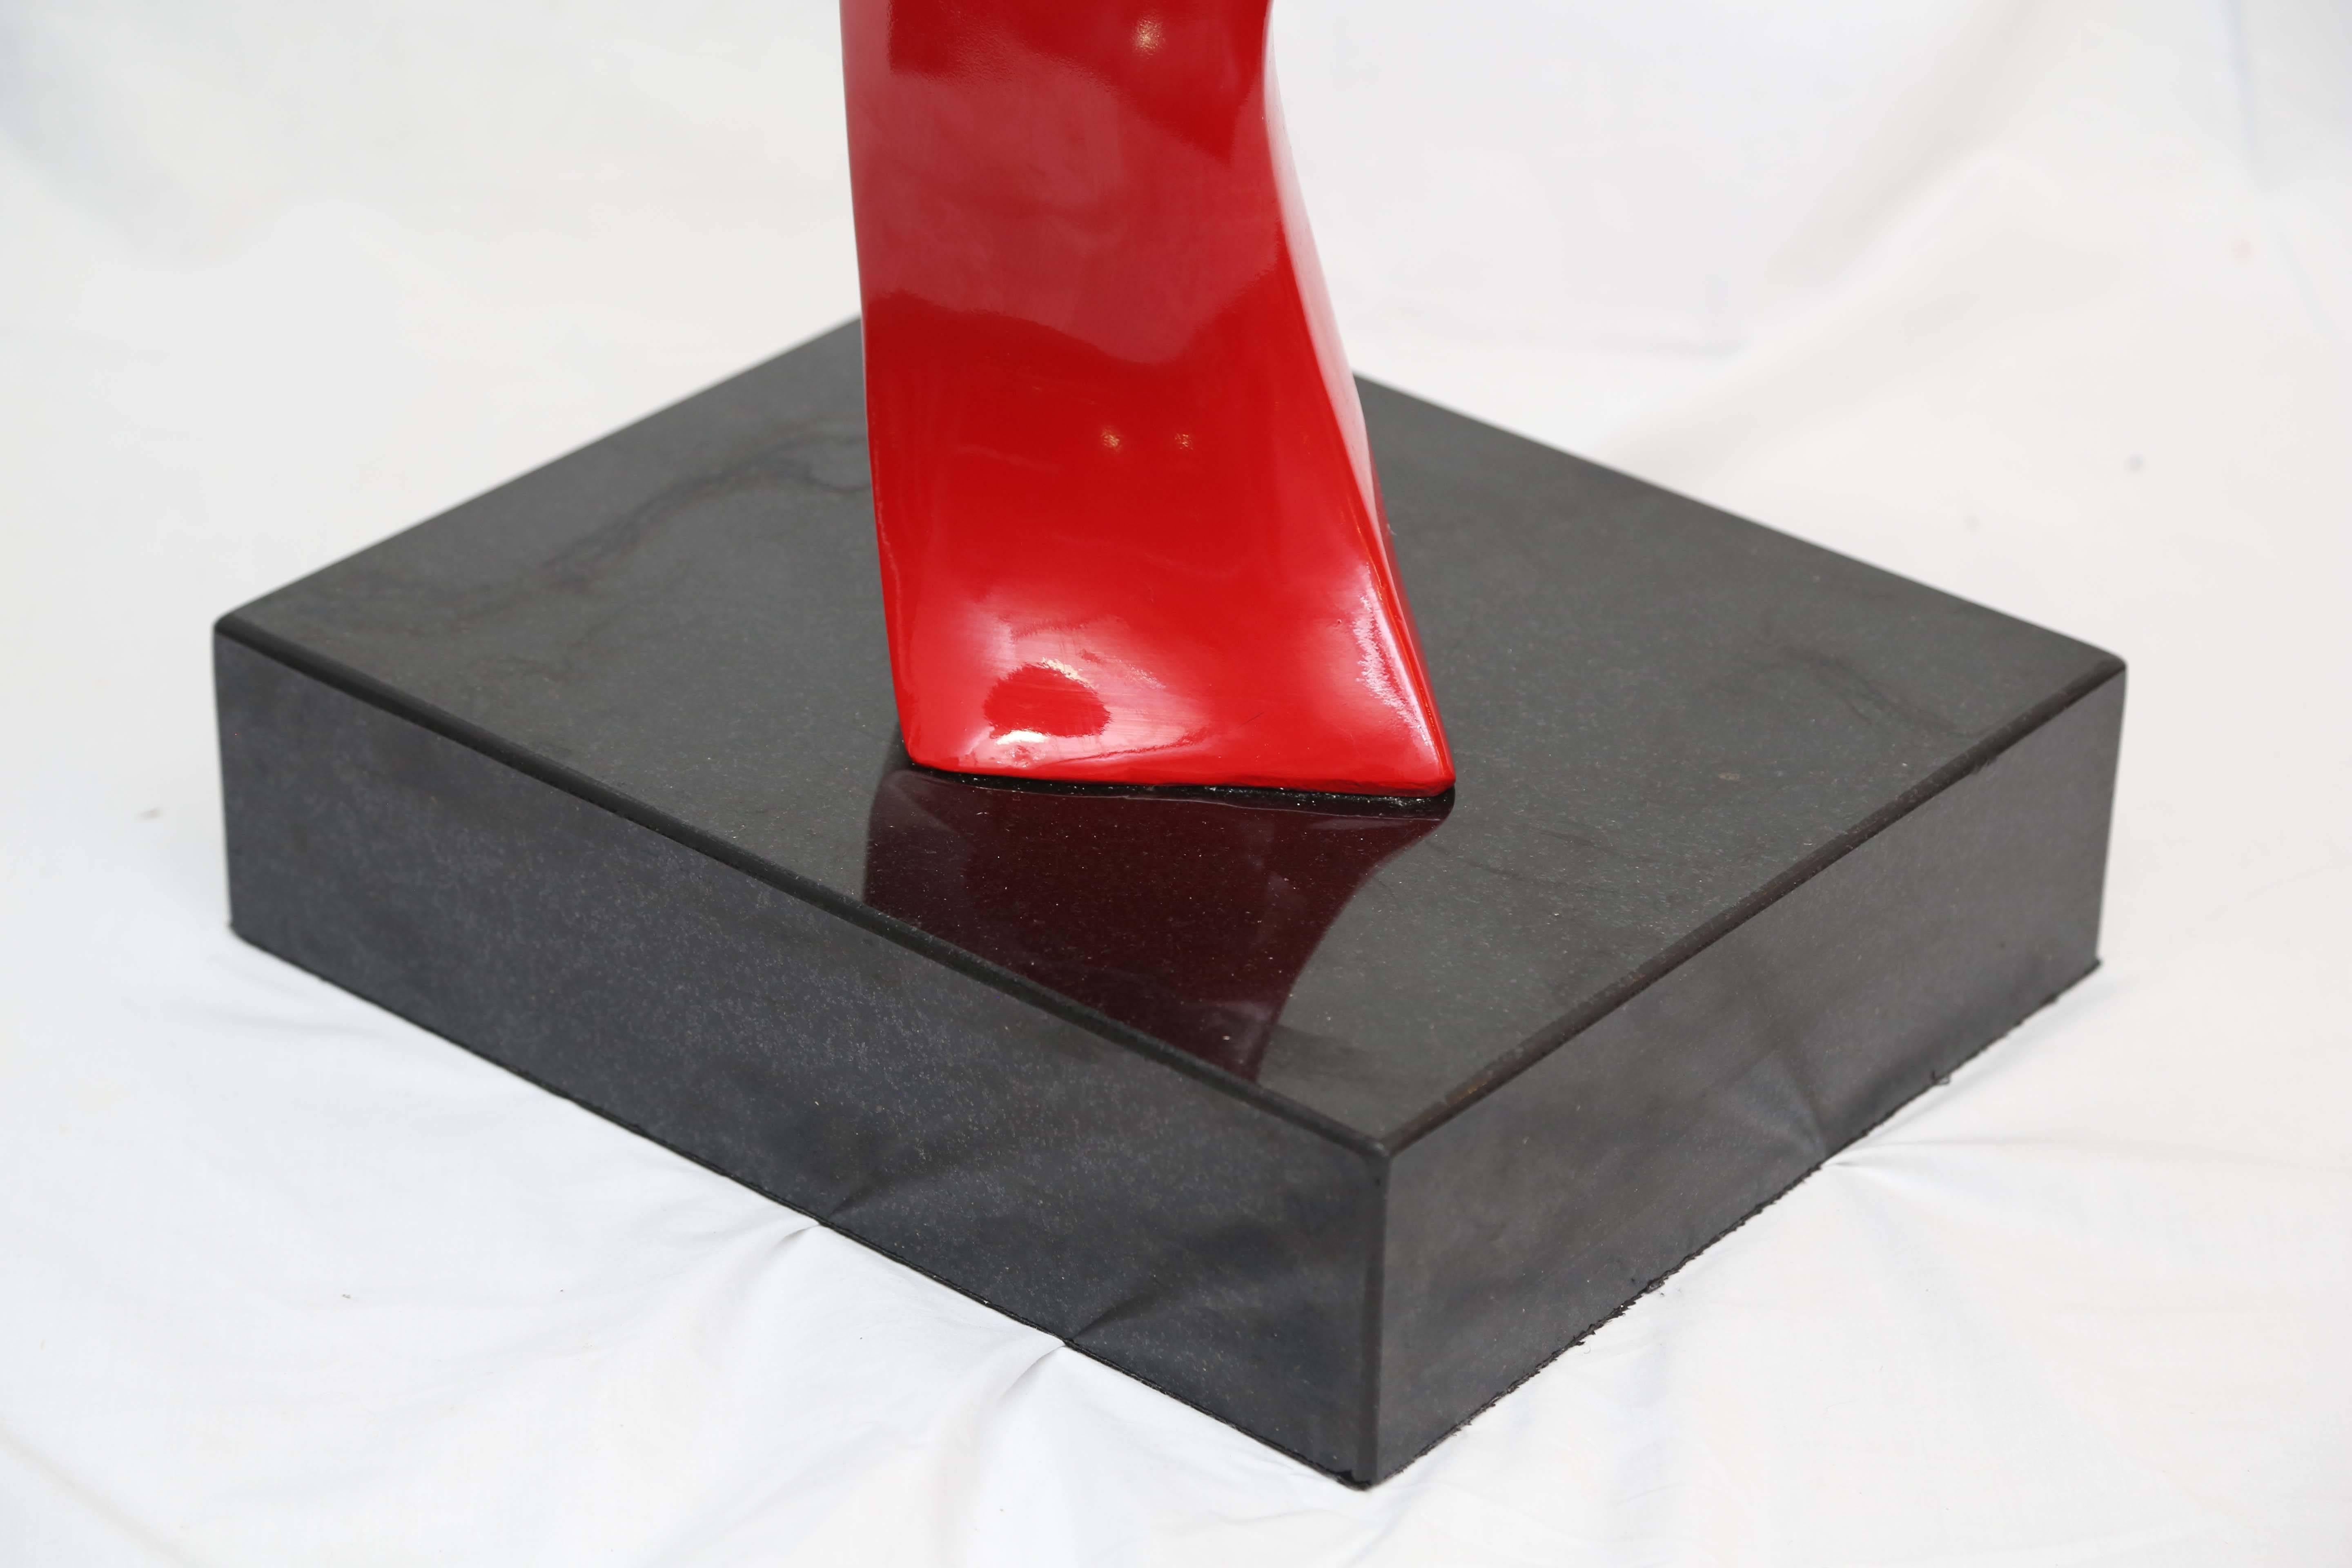 Fiberglass, Contemporary Abstract Industrial Sculpture in Red 1